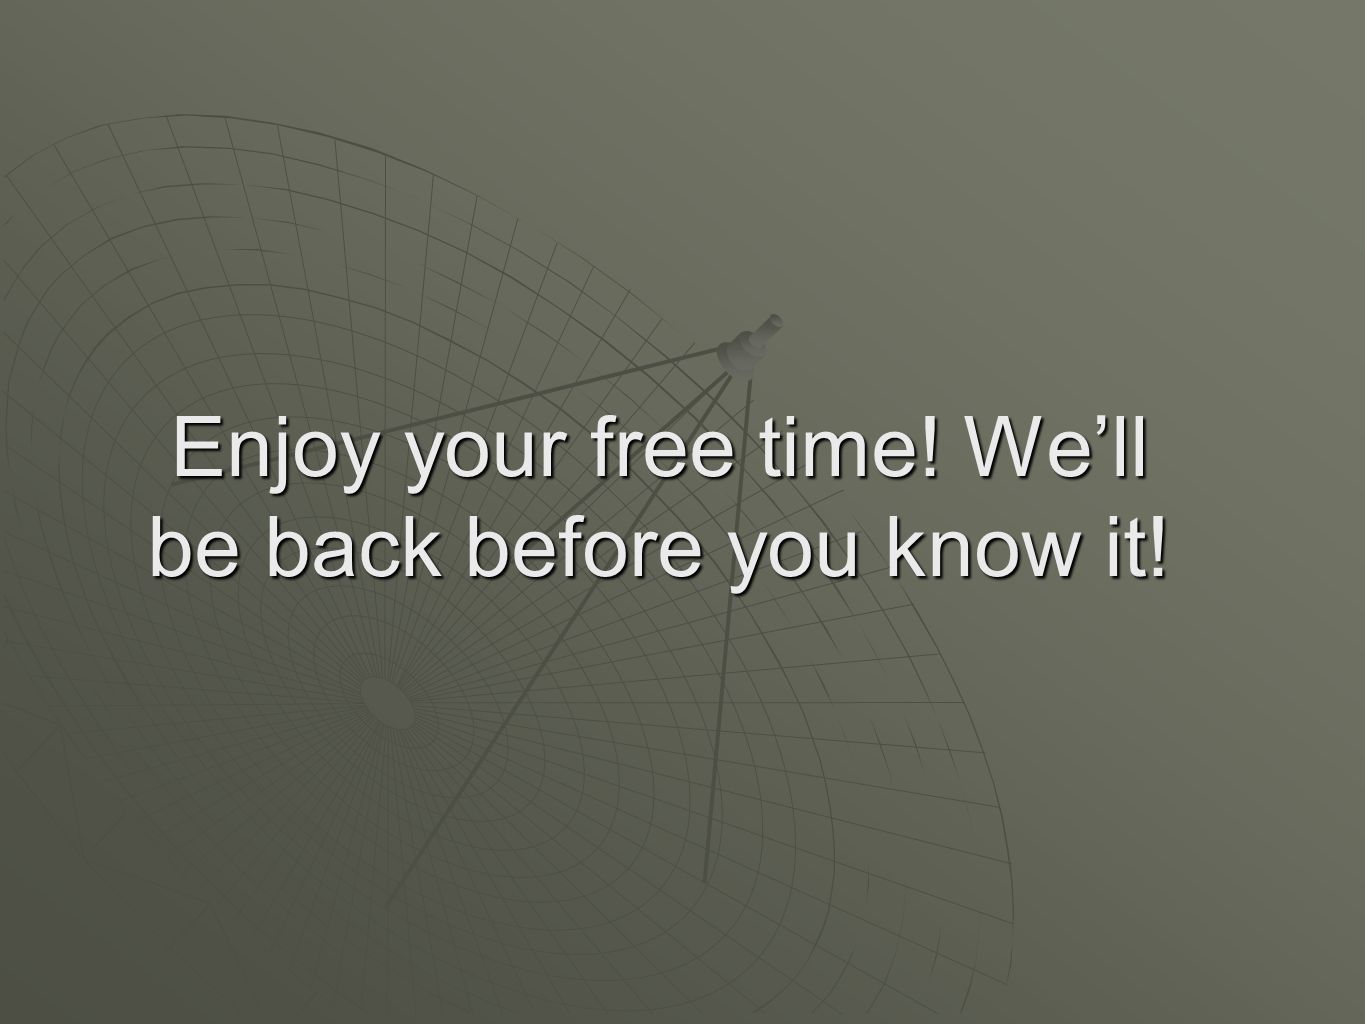 Enjoy your free time! We’ll be back before you know it!